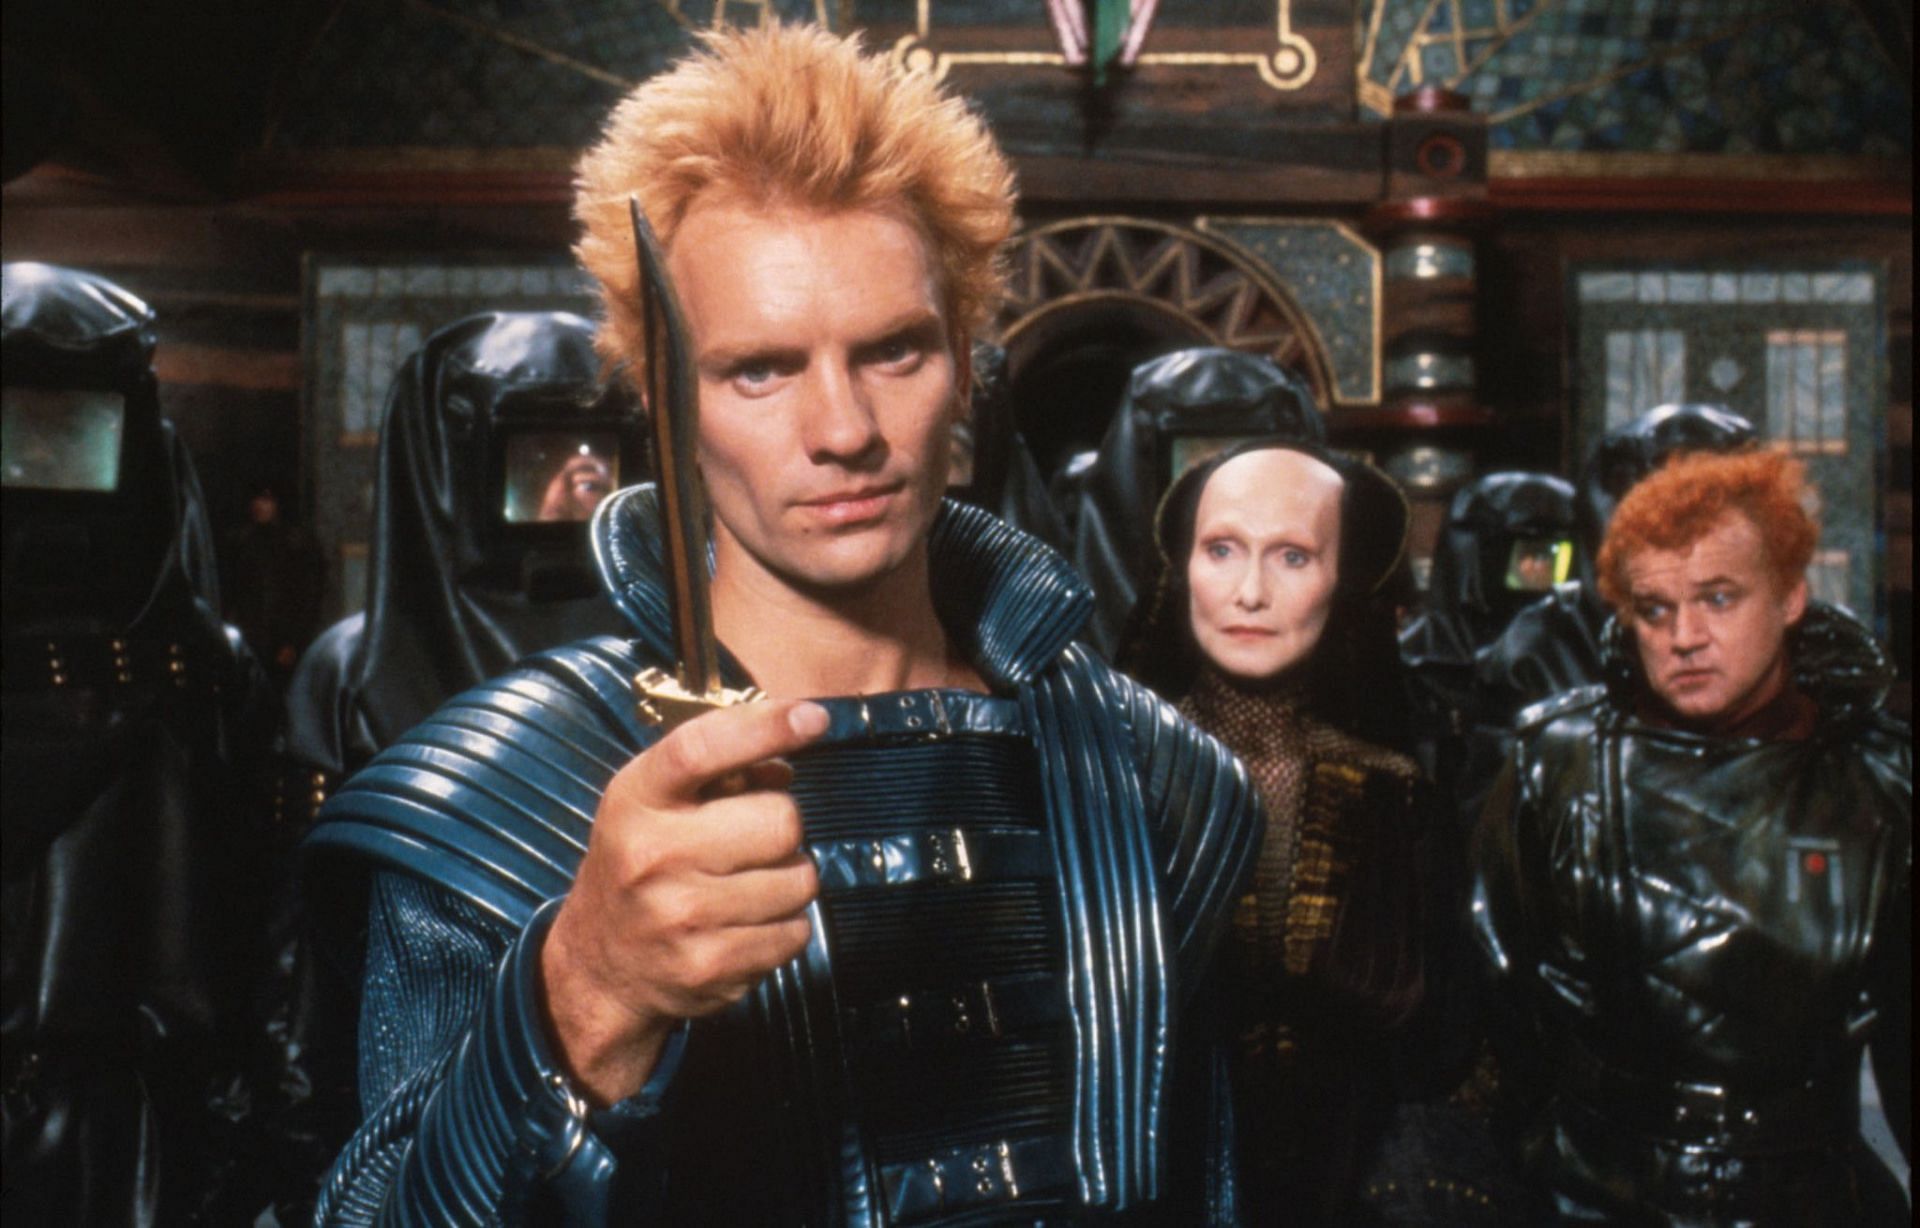 1984 Dune has received love from fans recently. (Image via IMDB)